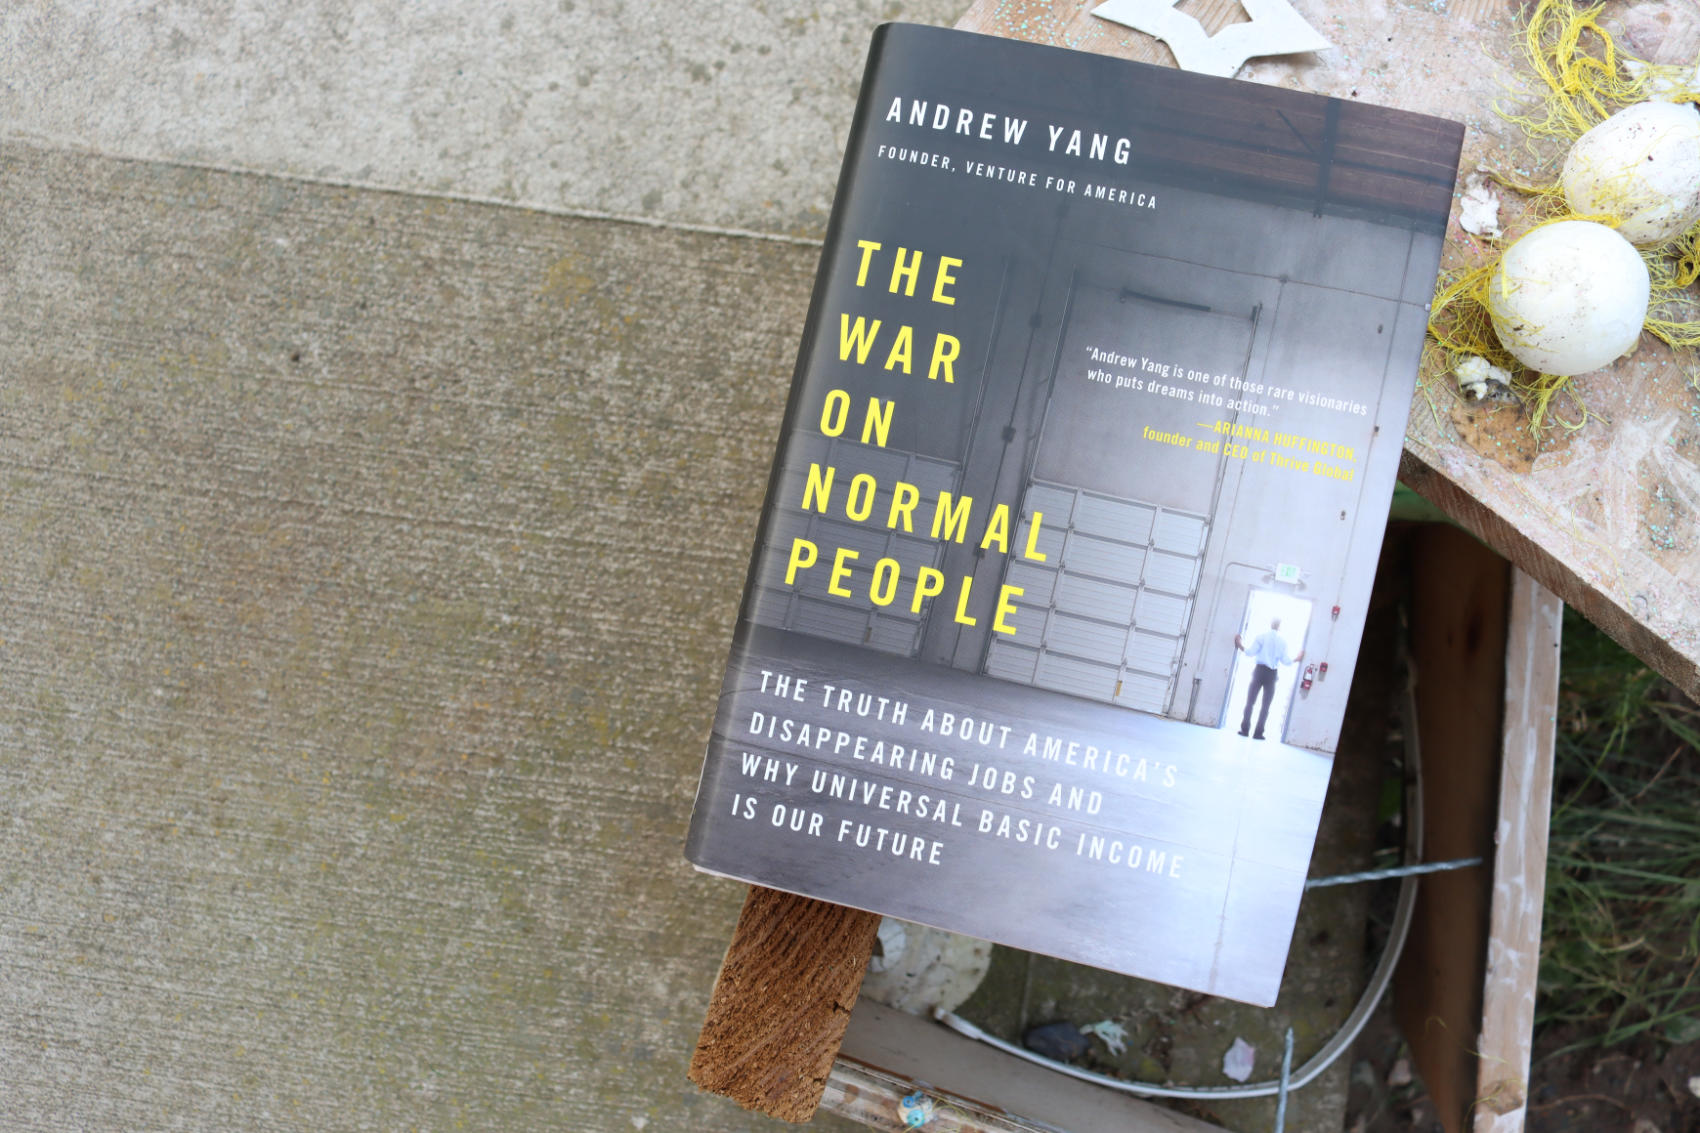 The War on Normal People by Andrew Yang